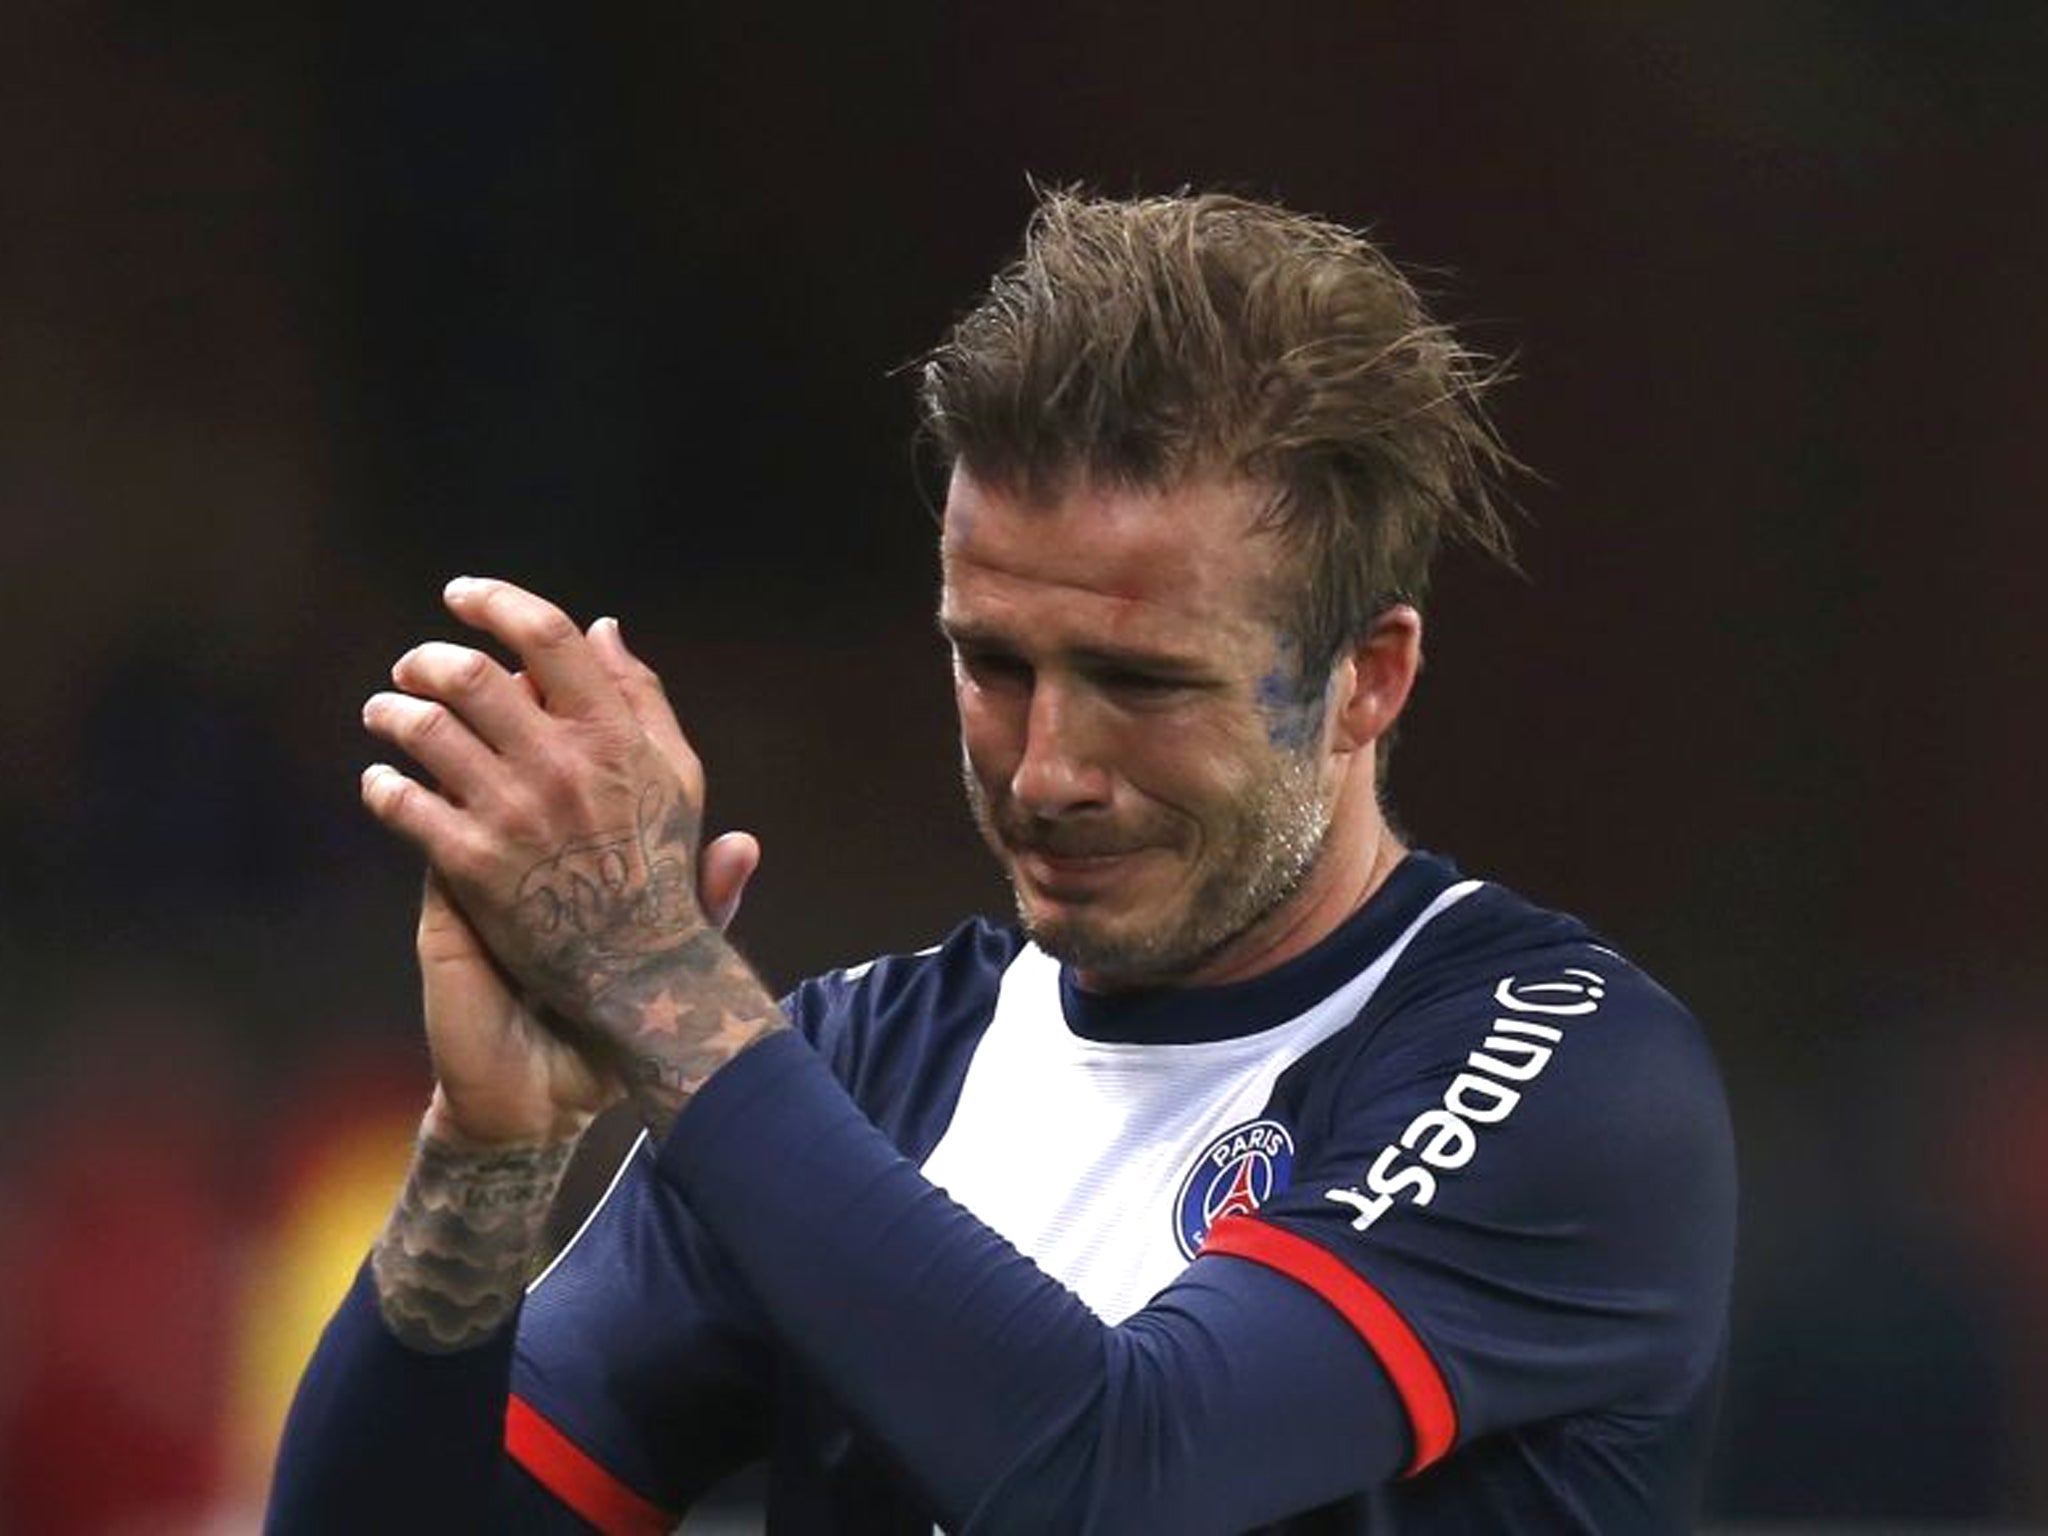 A tearful David Beckham played his last home game last weekend